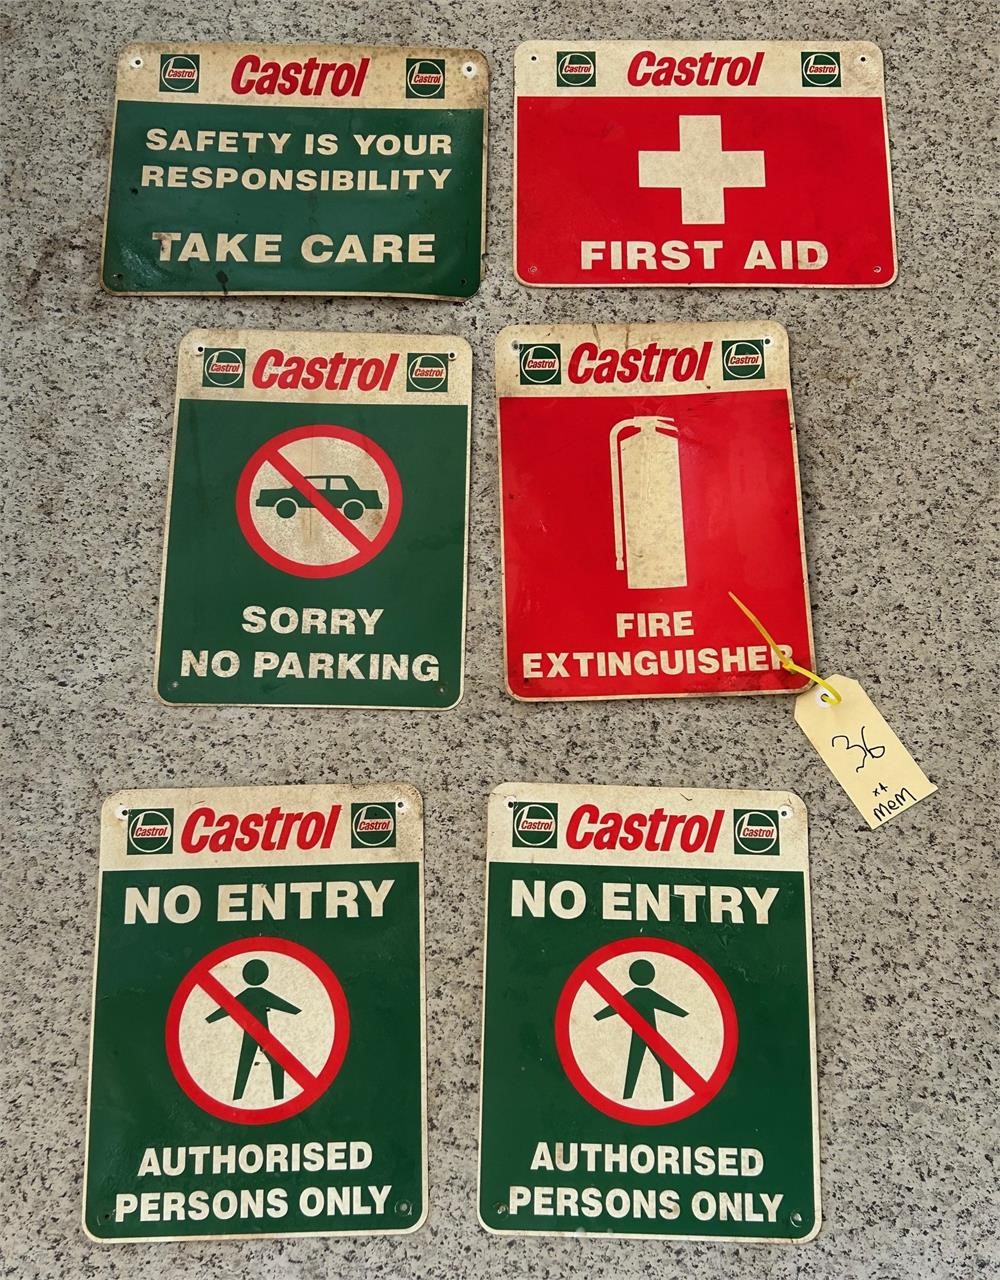 6 Castrol safety signs